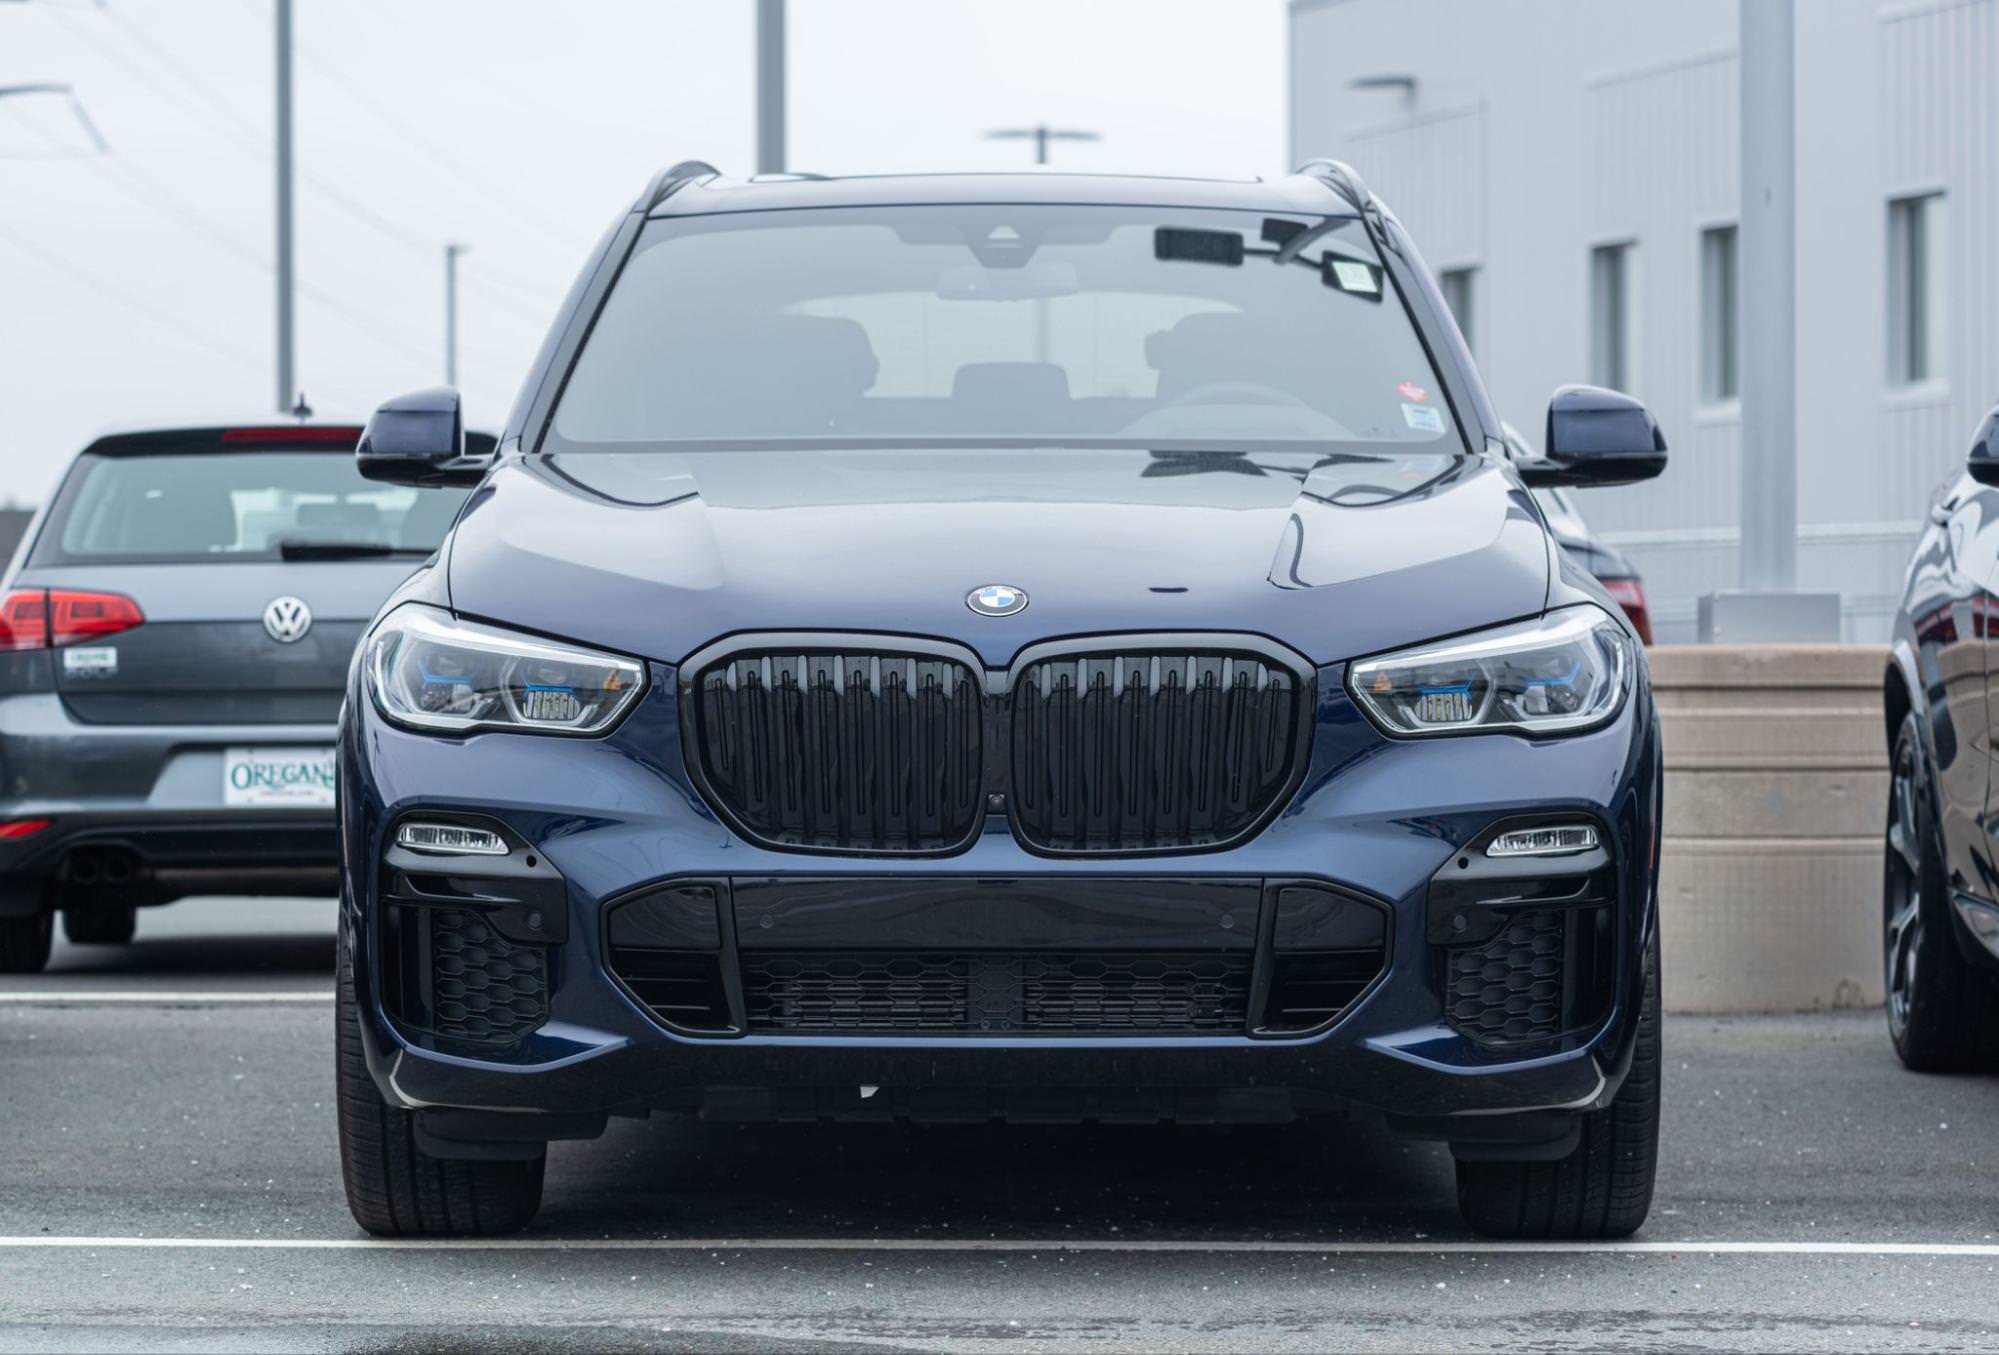 This image displays a front view of a BMW X5 SUV. The vehicle is dark blue or black and is shown in what appears to be a parking lot. The image focuses on the front of the car, highlighting its large kidney grille.